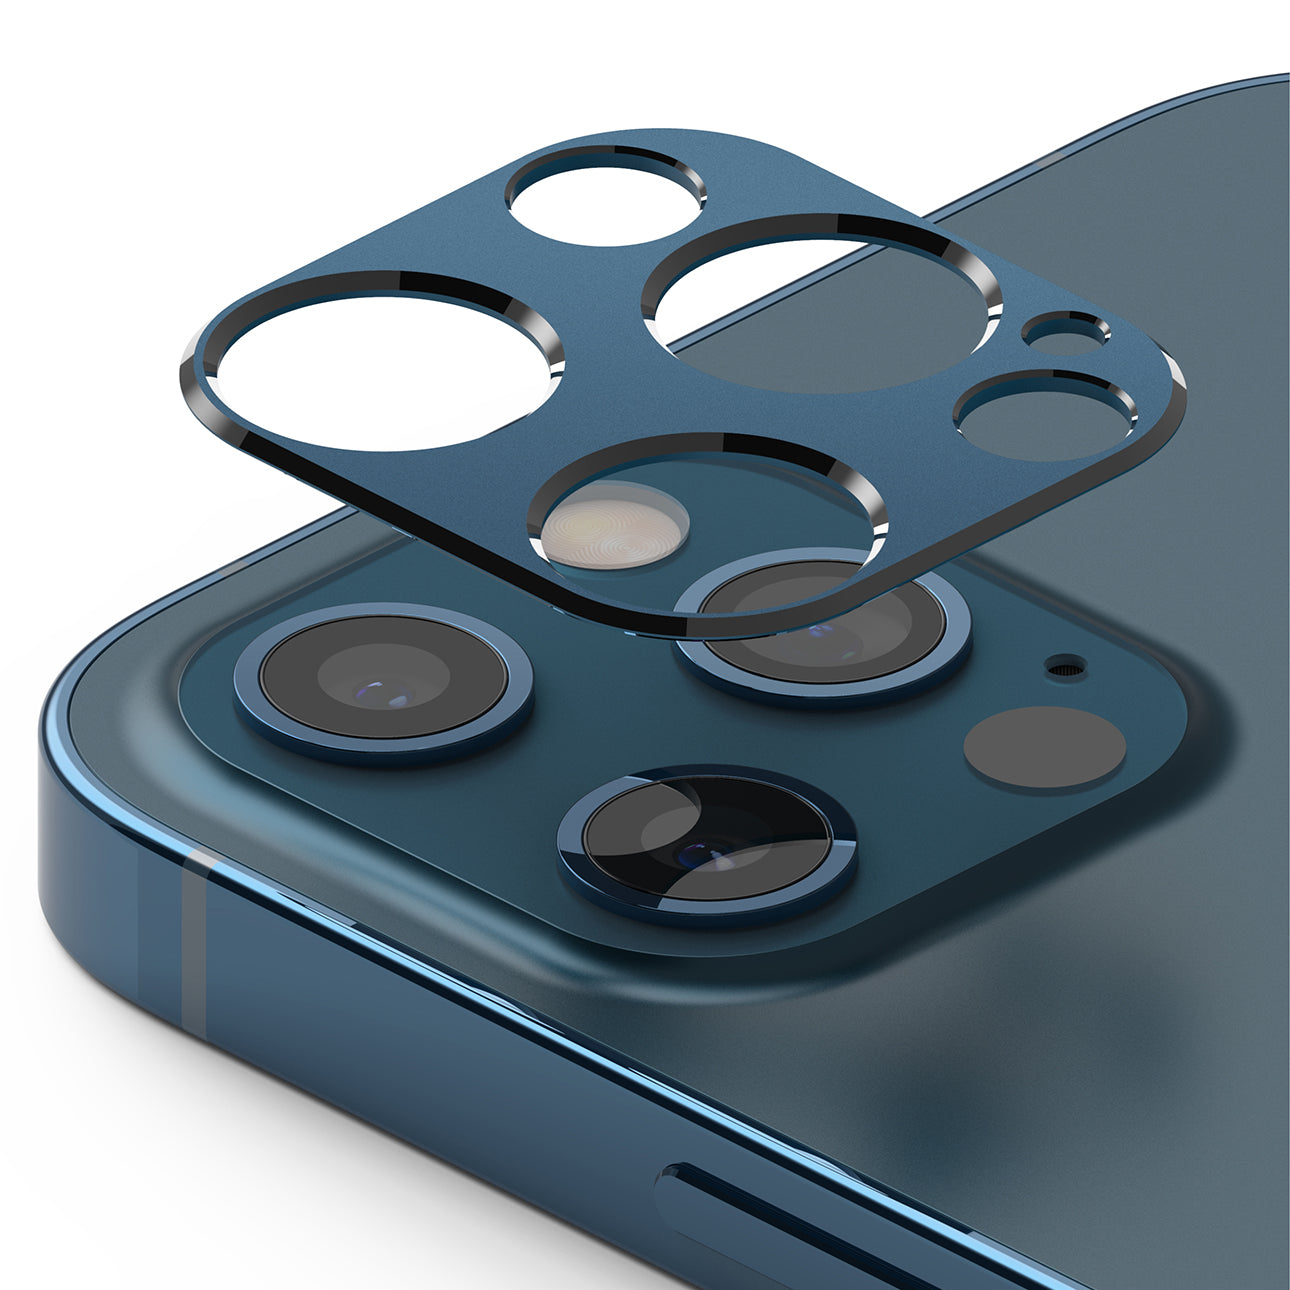 ringke camera styling for iphone 12 pro - blue